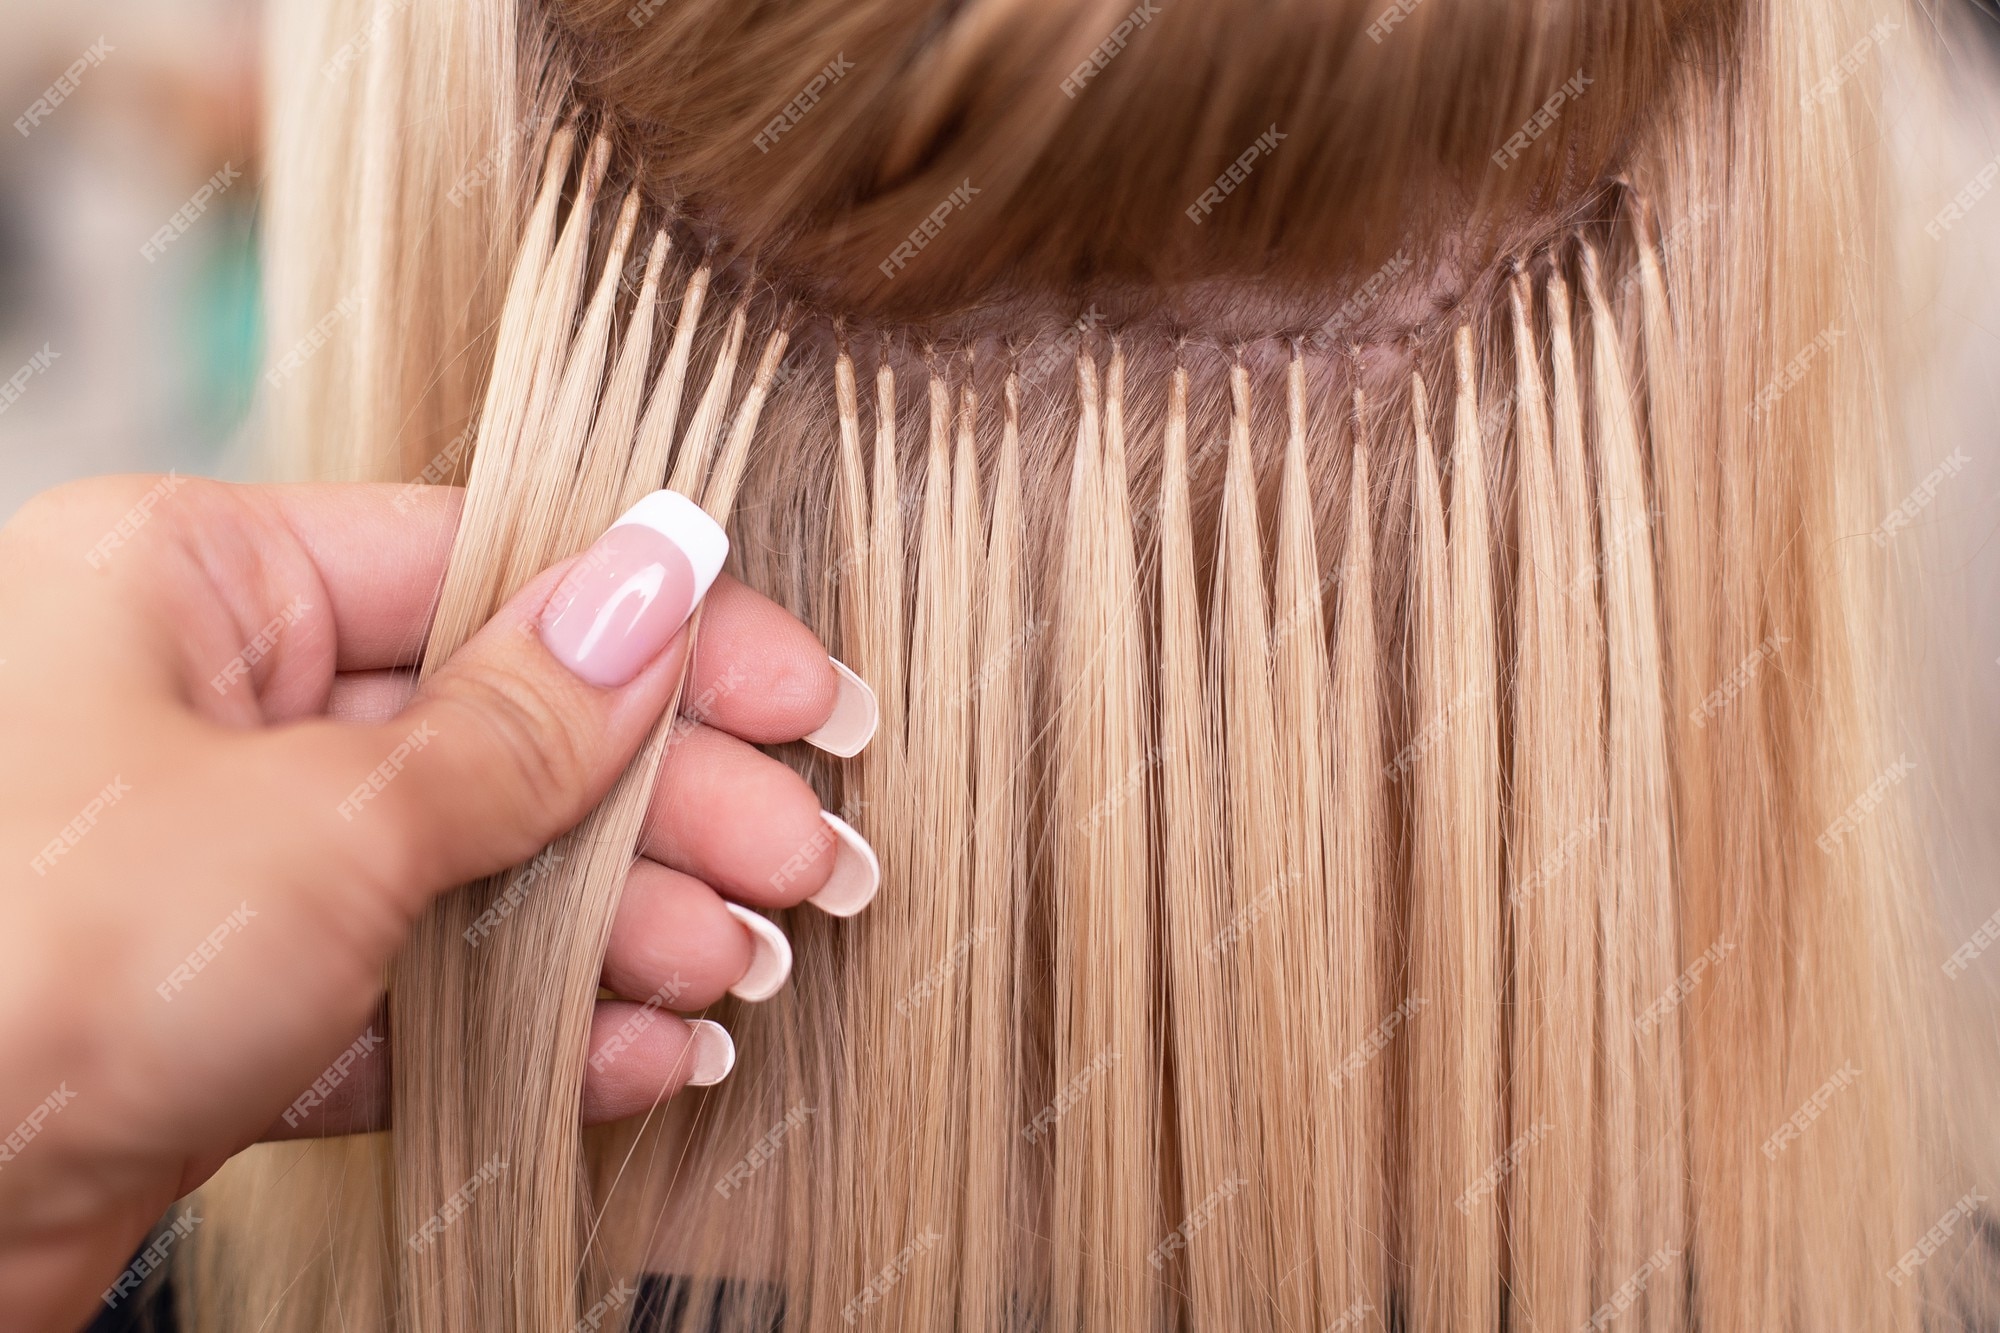 How to remove hair extensions